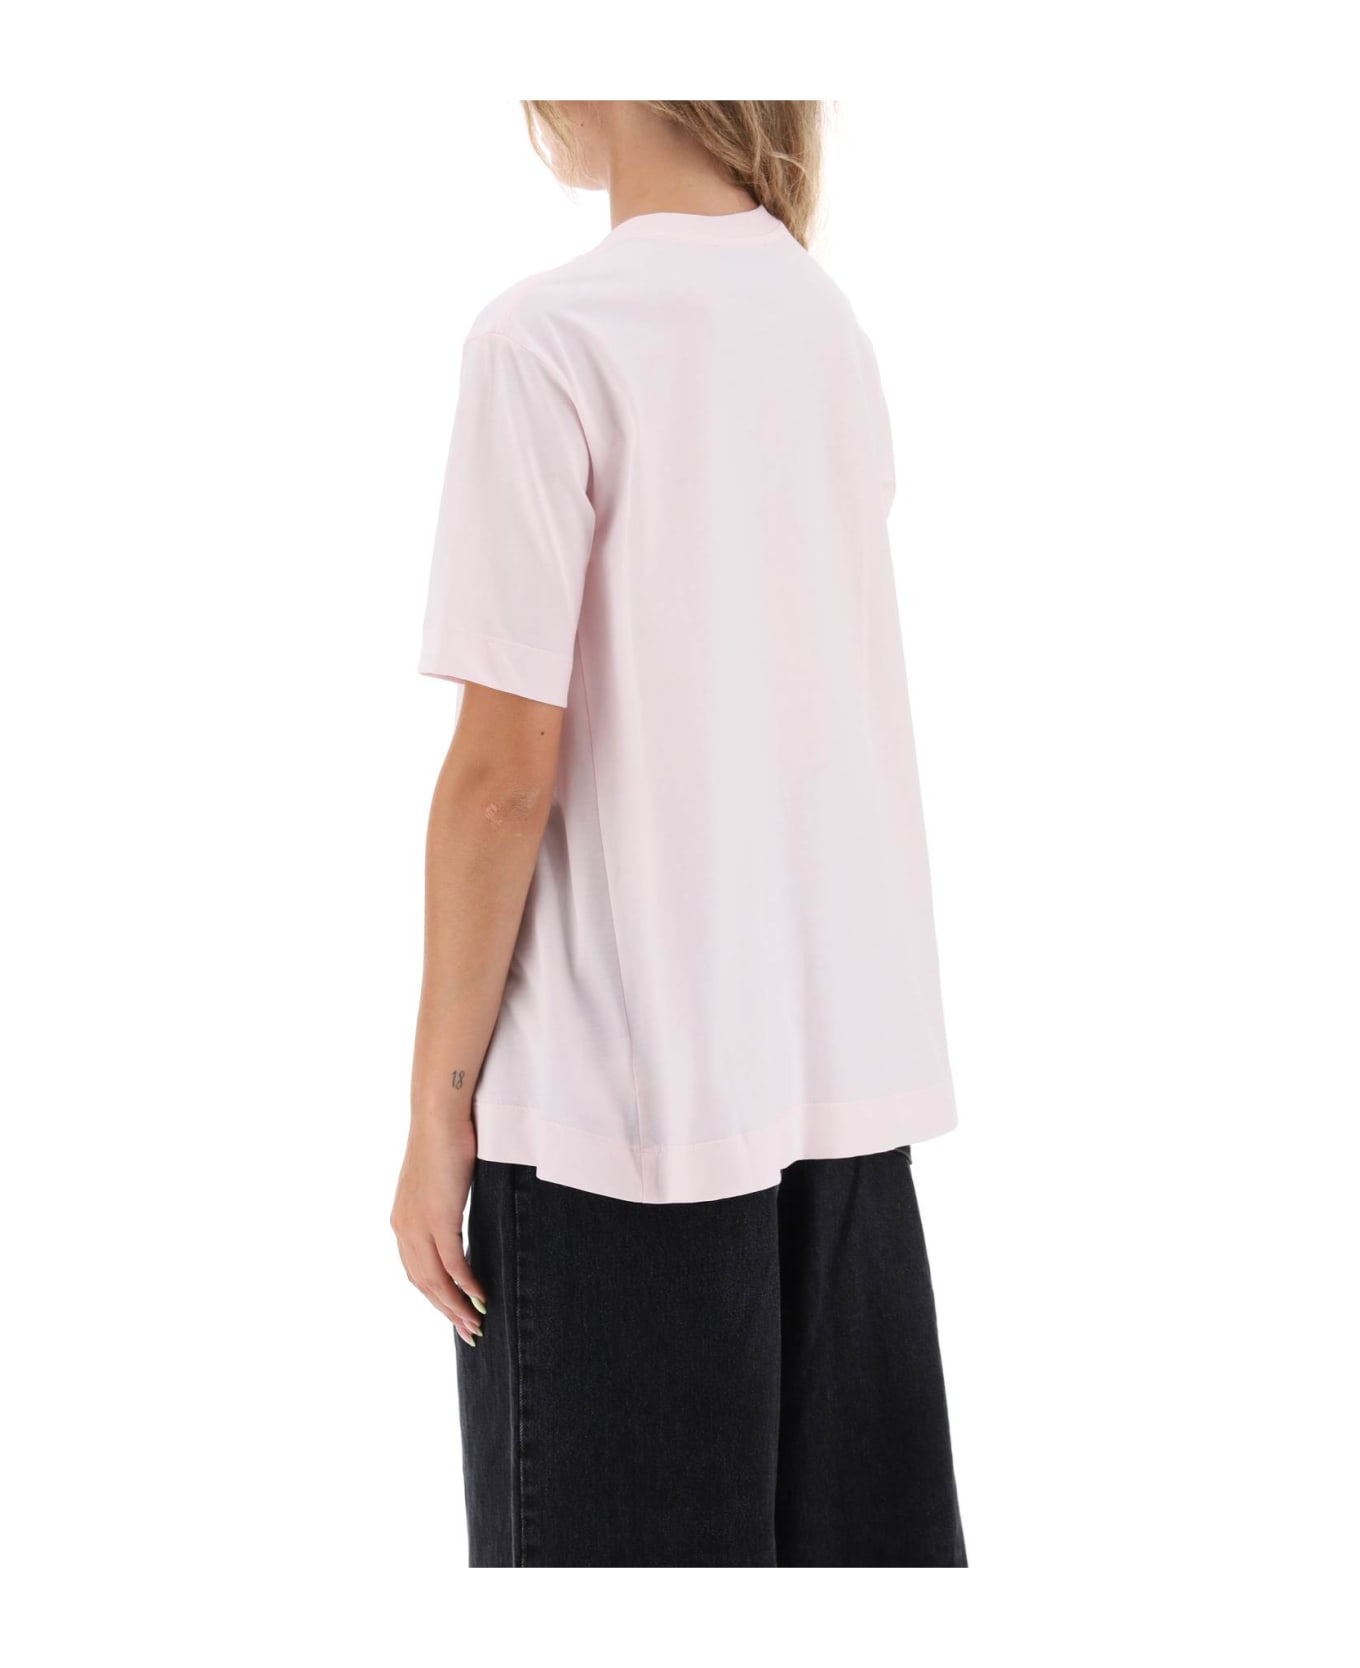 Simone Rocha A-line T-shirt With Bow Detail - PINK RED PEARL (Pink)